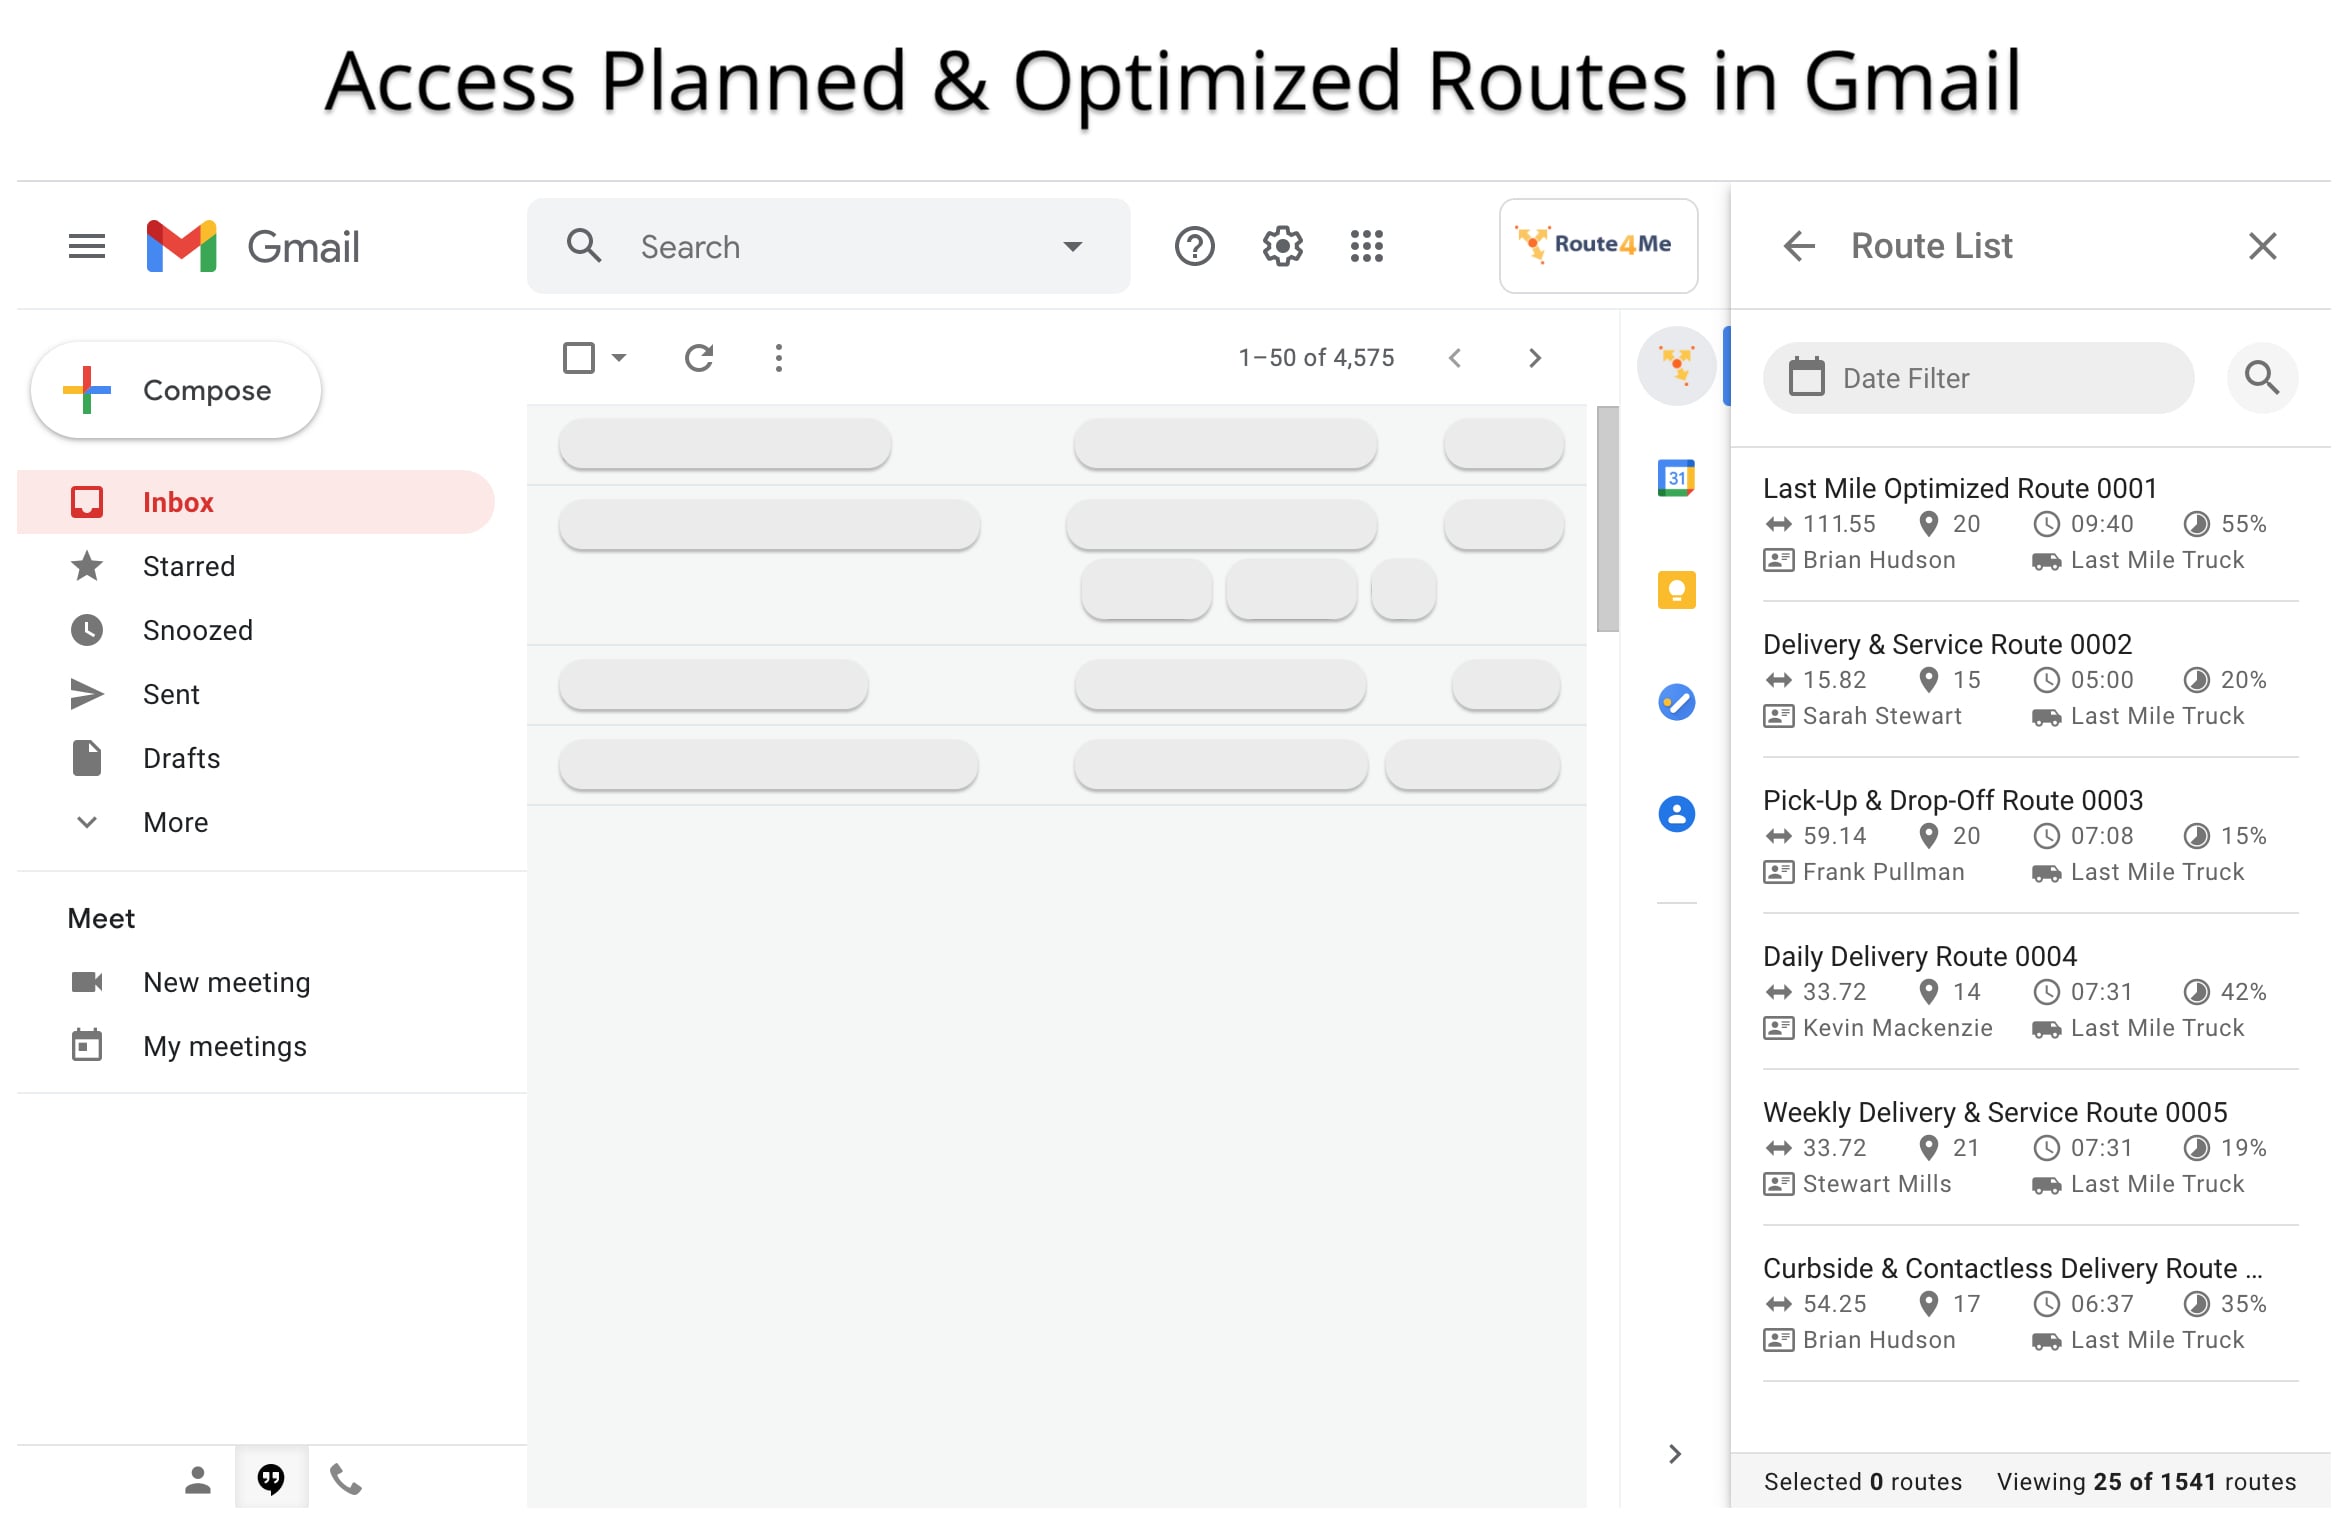 Access your planned, optimized, and scheduled routes in Gmail with route planning for Chrome